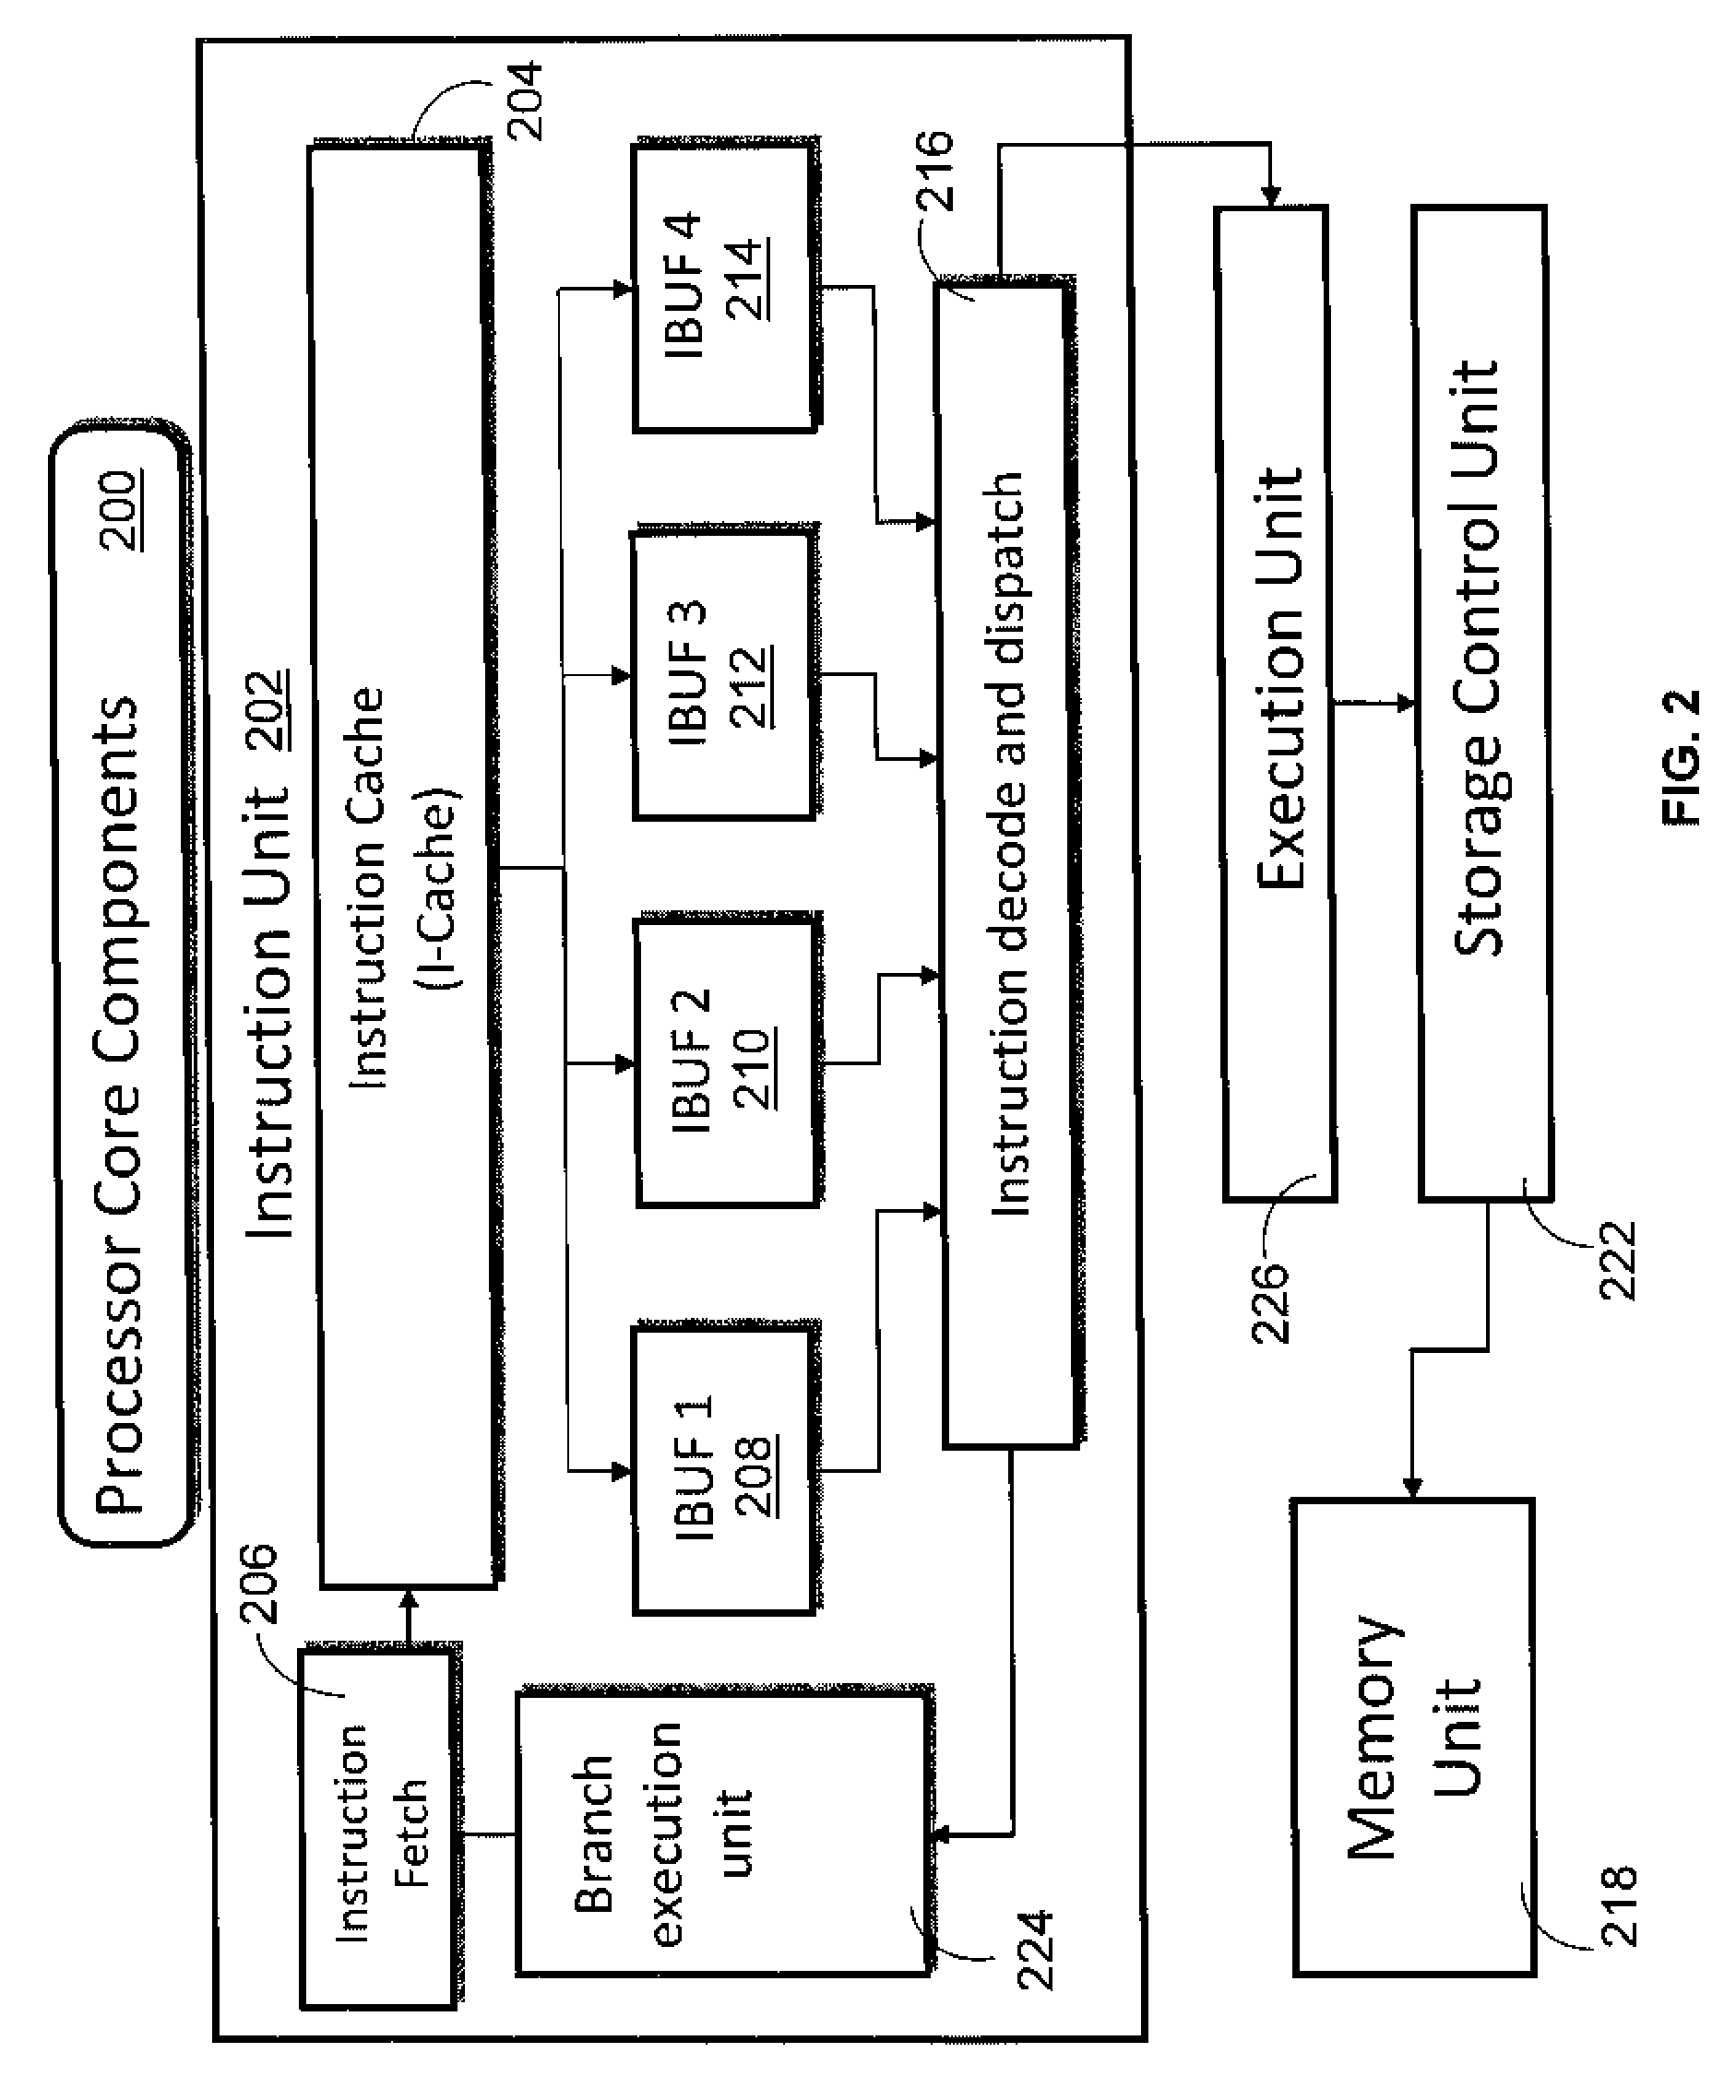 Apparatus and Method for Improving Efficiency of Short Loop Instruction Fetch